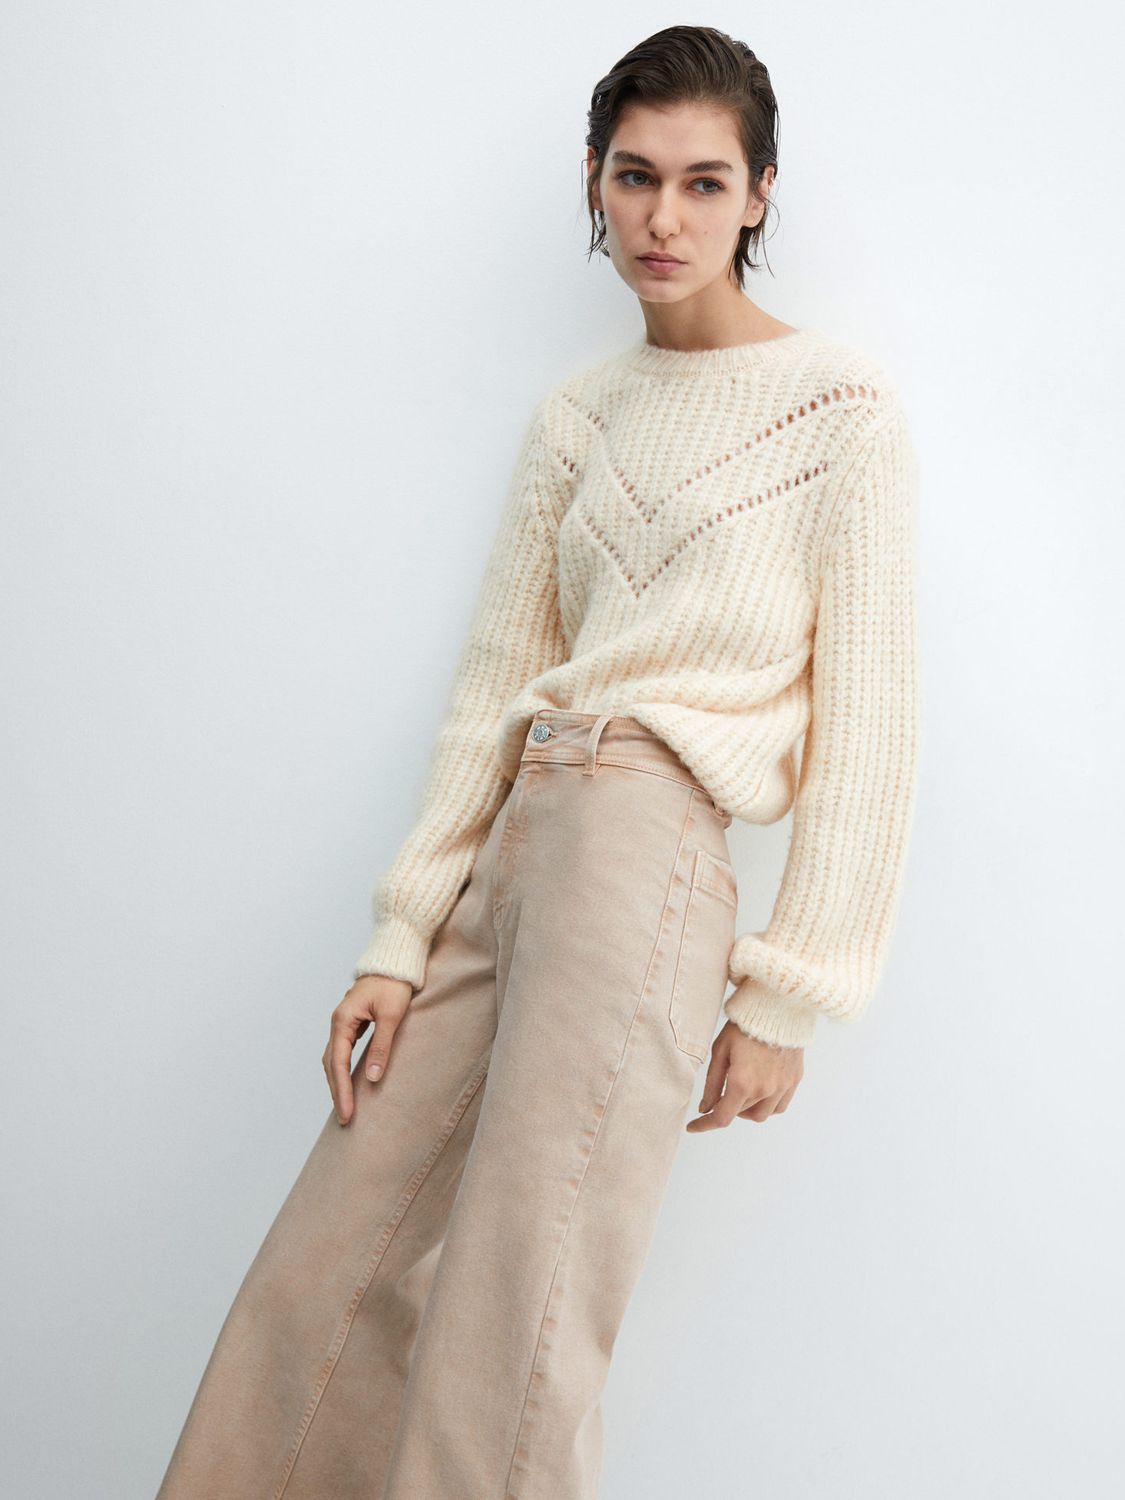 Buy Mango Catherin High Waist Culotte Jeans, Light Pastel Brown Online at johnlewis.com